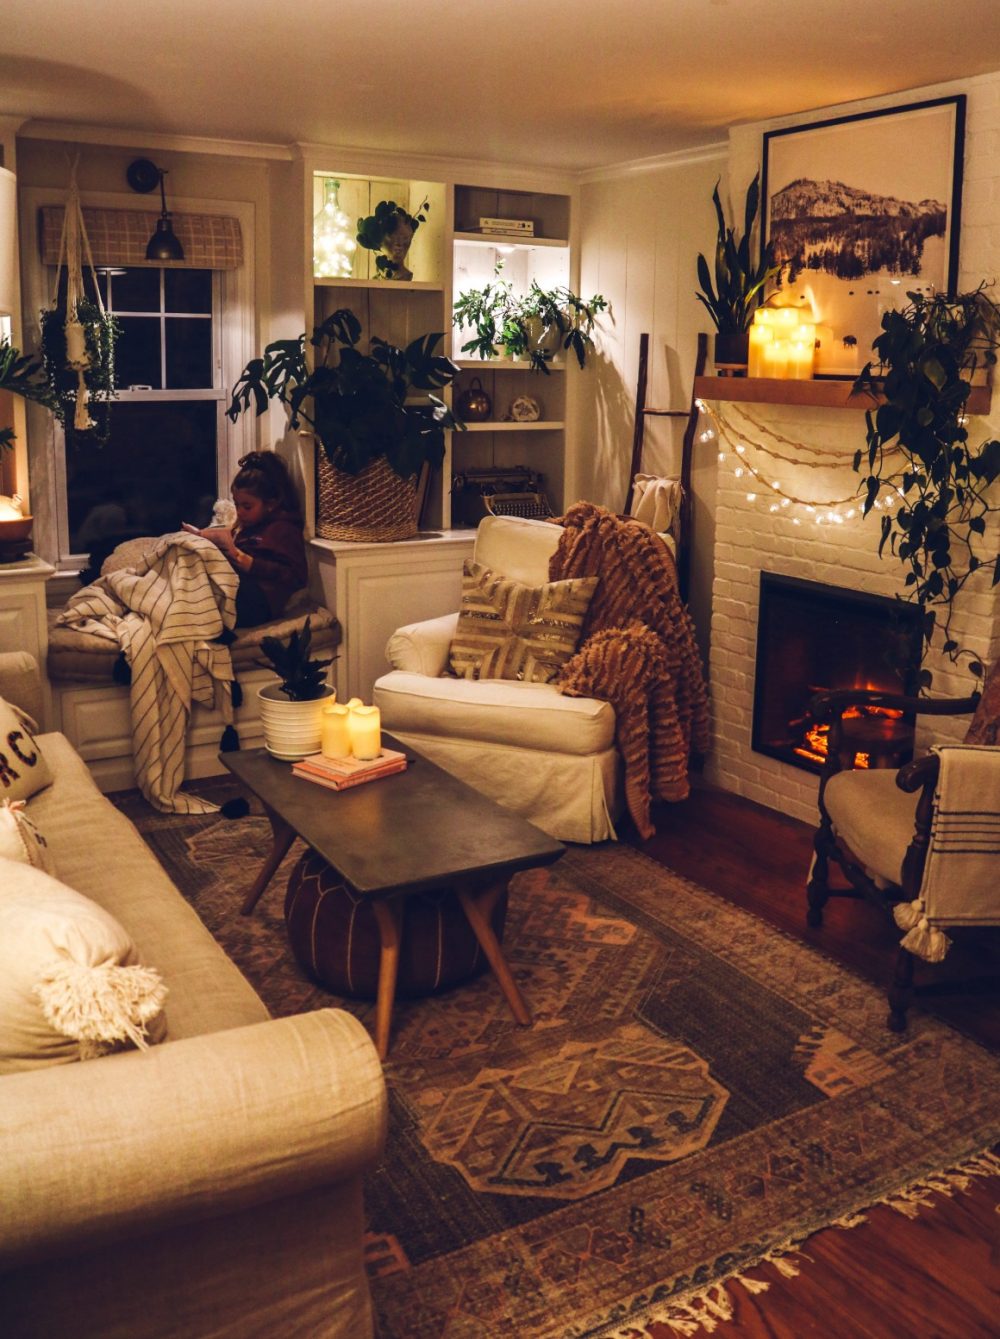 How To Keep Your House Feeling Cozy After Christmas is Over